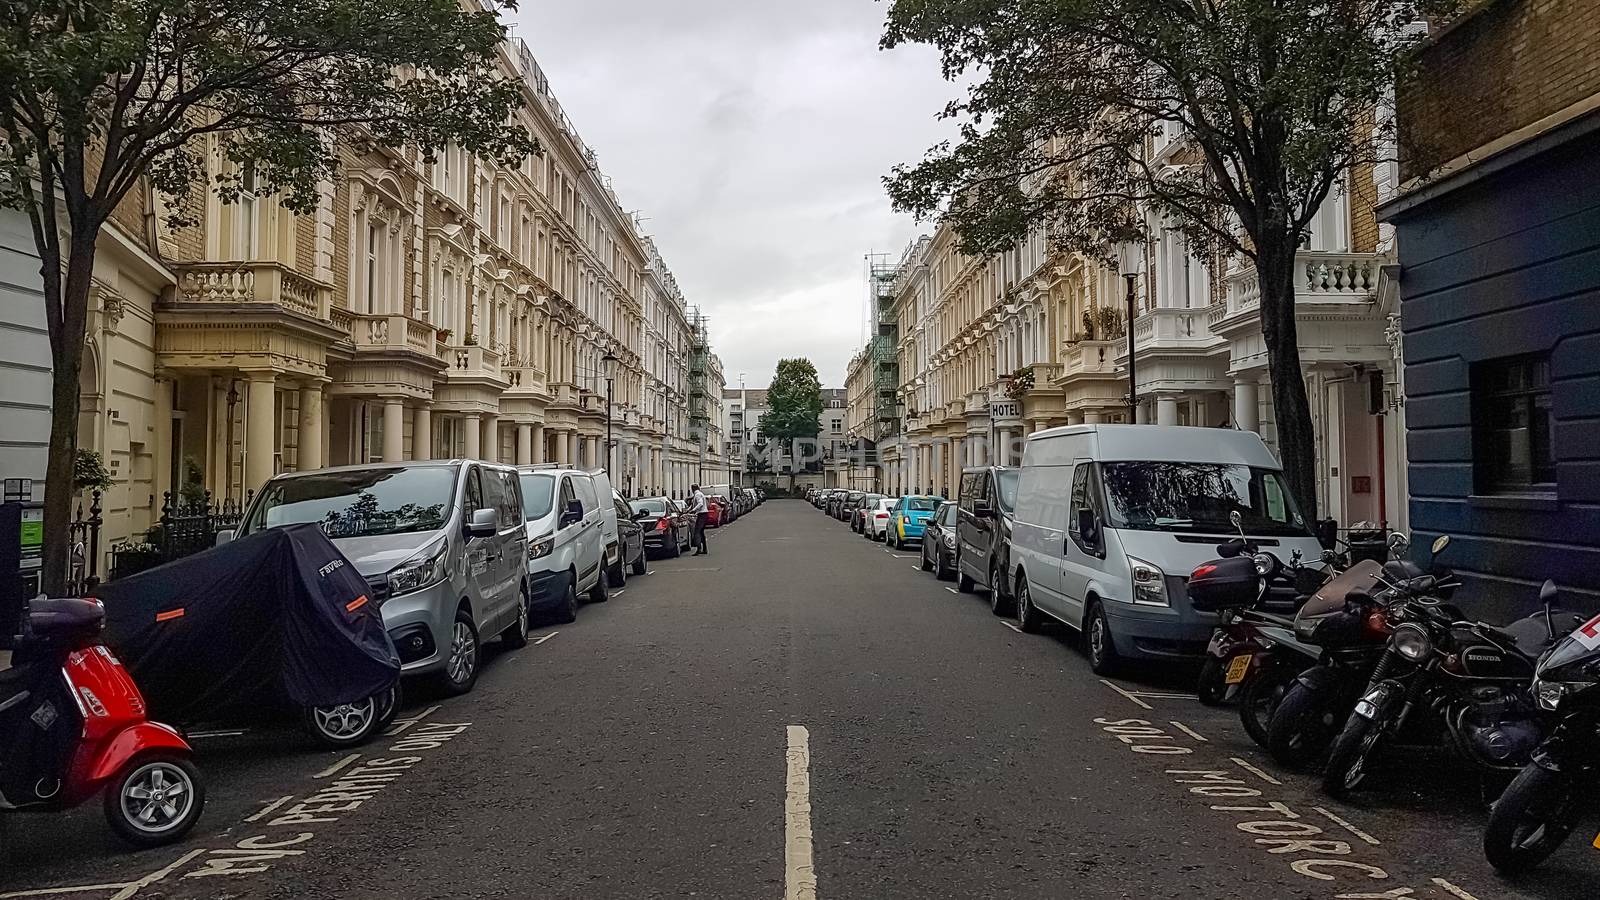 London, UK - July 8, 2020: View of a street in central London by DamantisZ